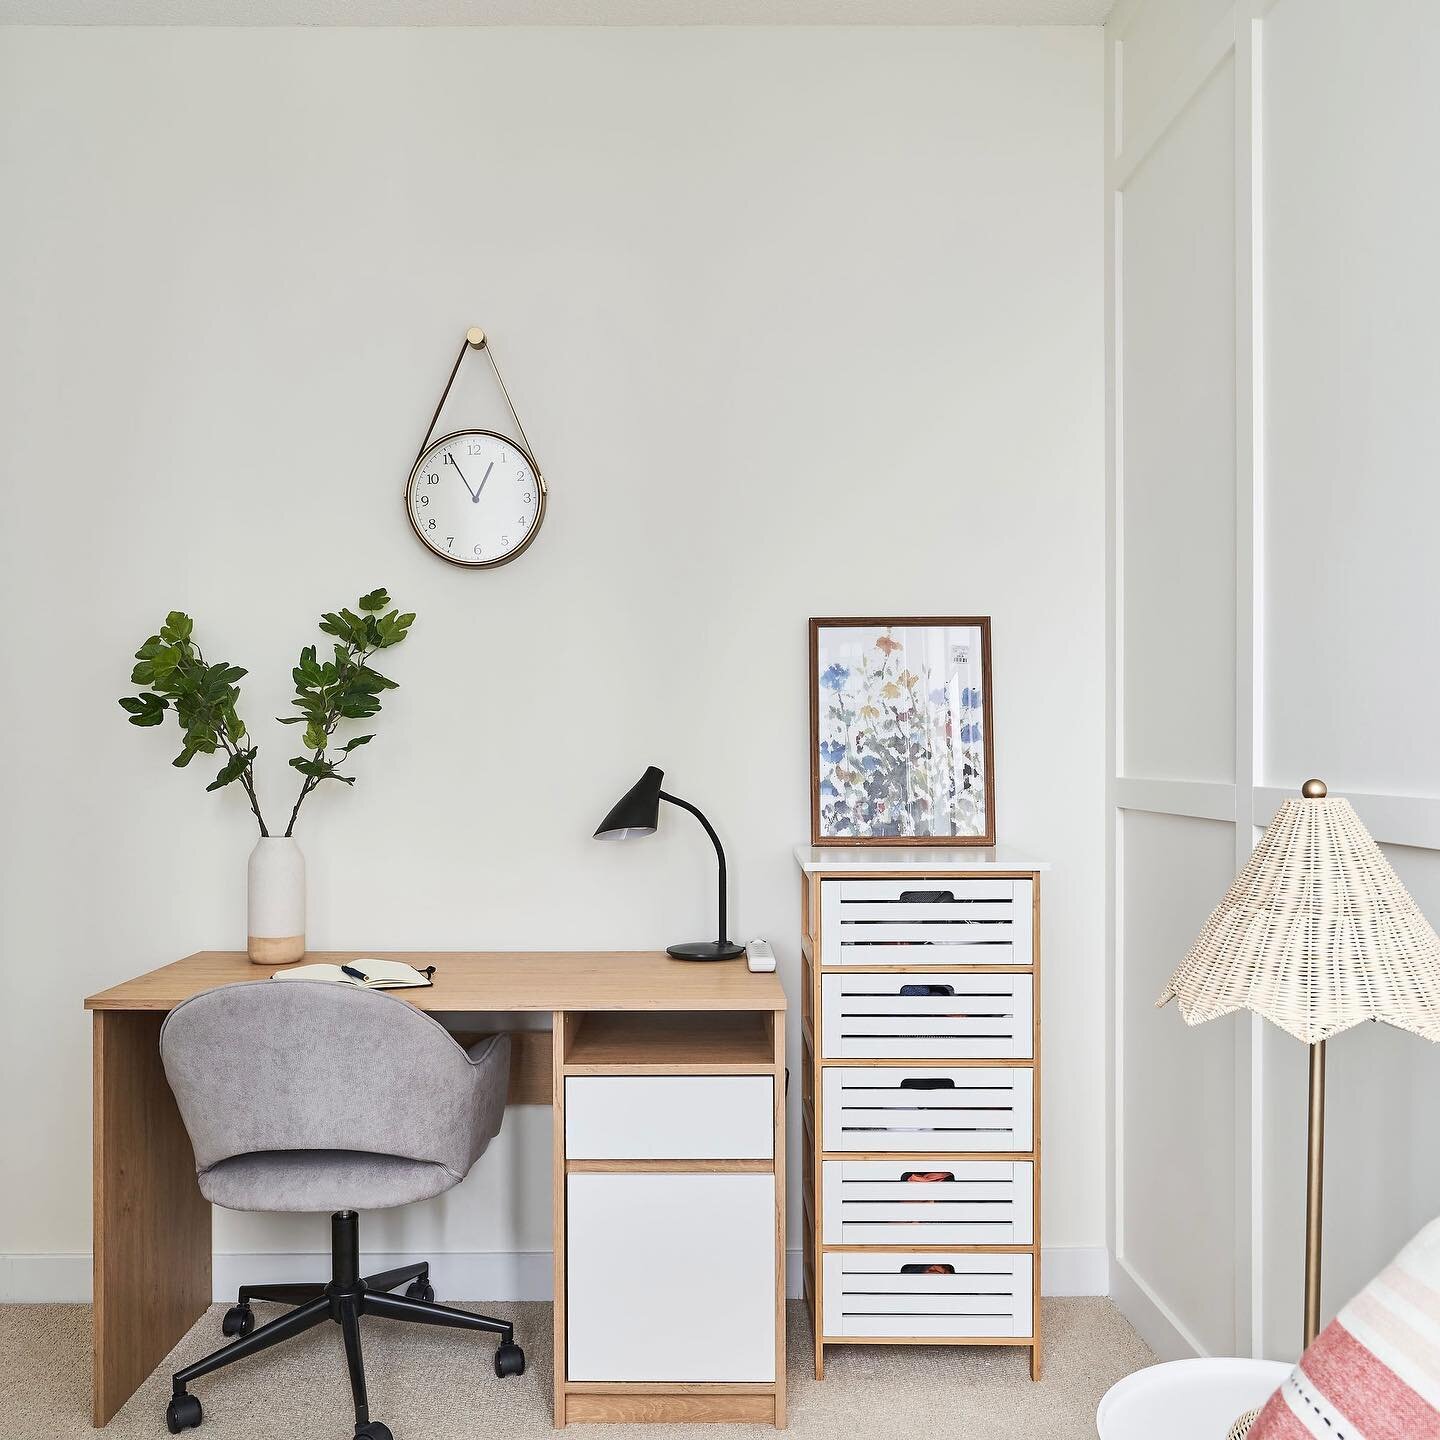 Working from home today? Bringing you some inspiration!
.
.
.
Design: @studiothreegen | Photo: @shotbyjuleslee 
.
.
.
#officedesign #workfromhome #homeoffice #homeofficedecor #officedesigns #interiordesign #luxuryhomes #modernhome